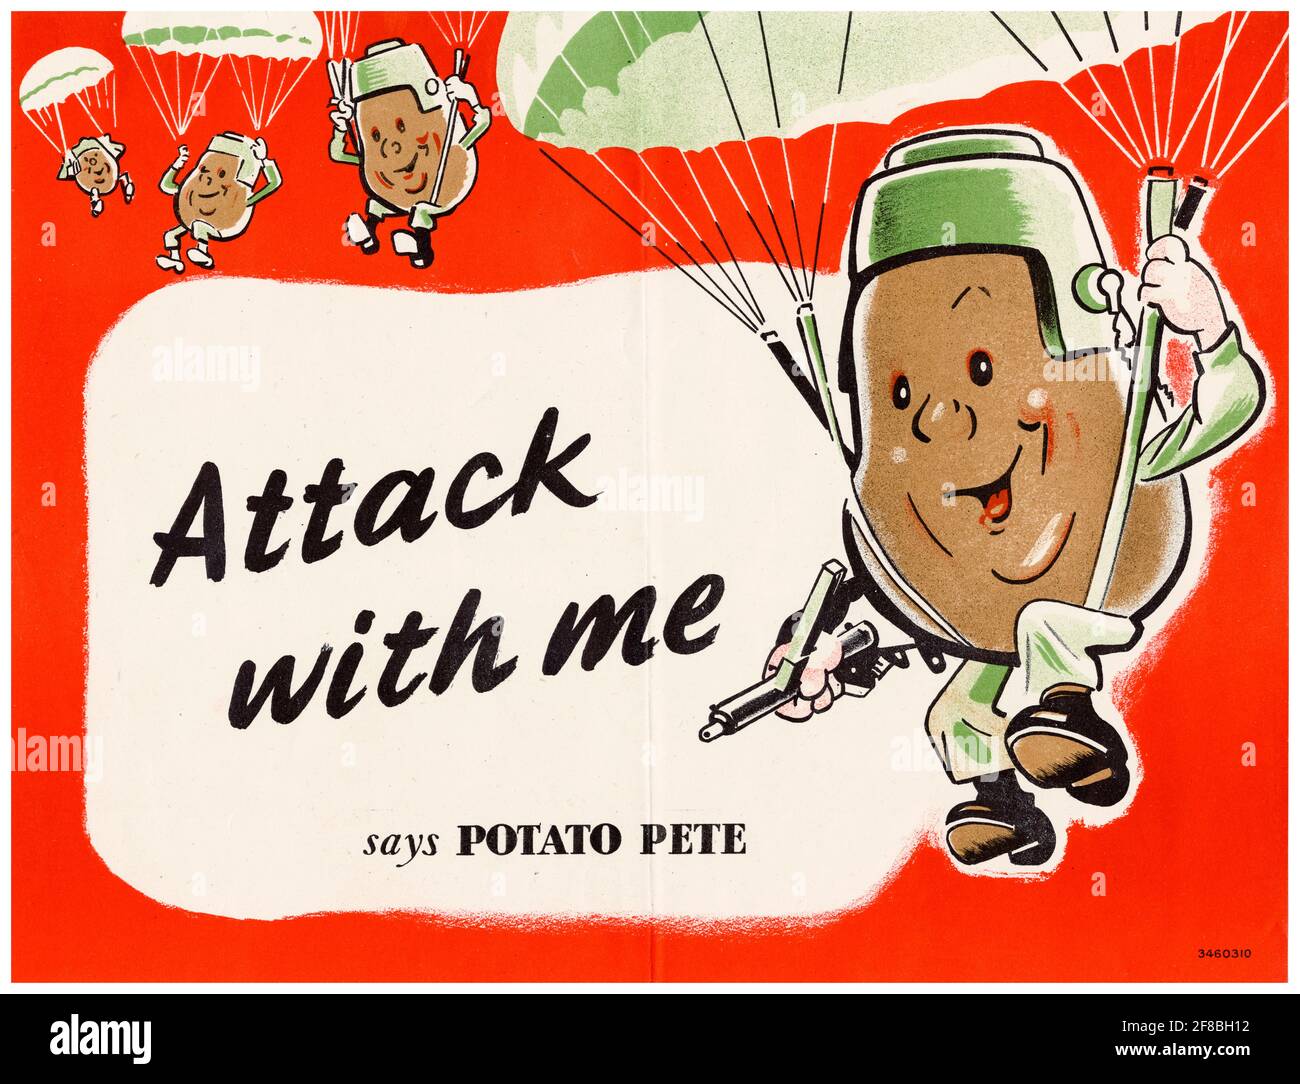 British, WW2 Food Production poster, Attack With Me says Potato Pete, 1942-1945 Stock Photo